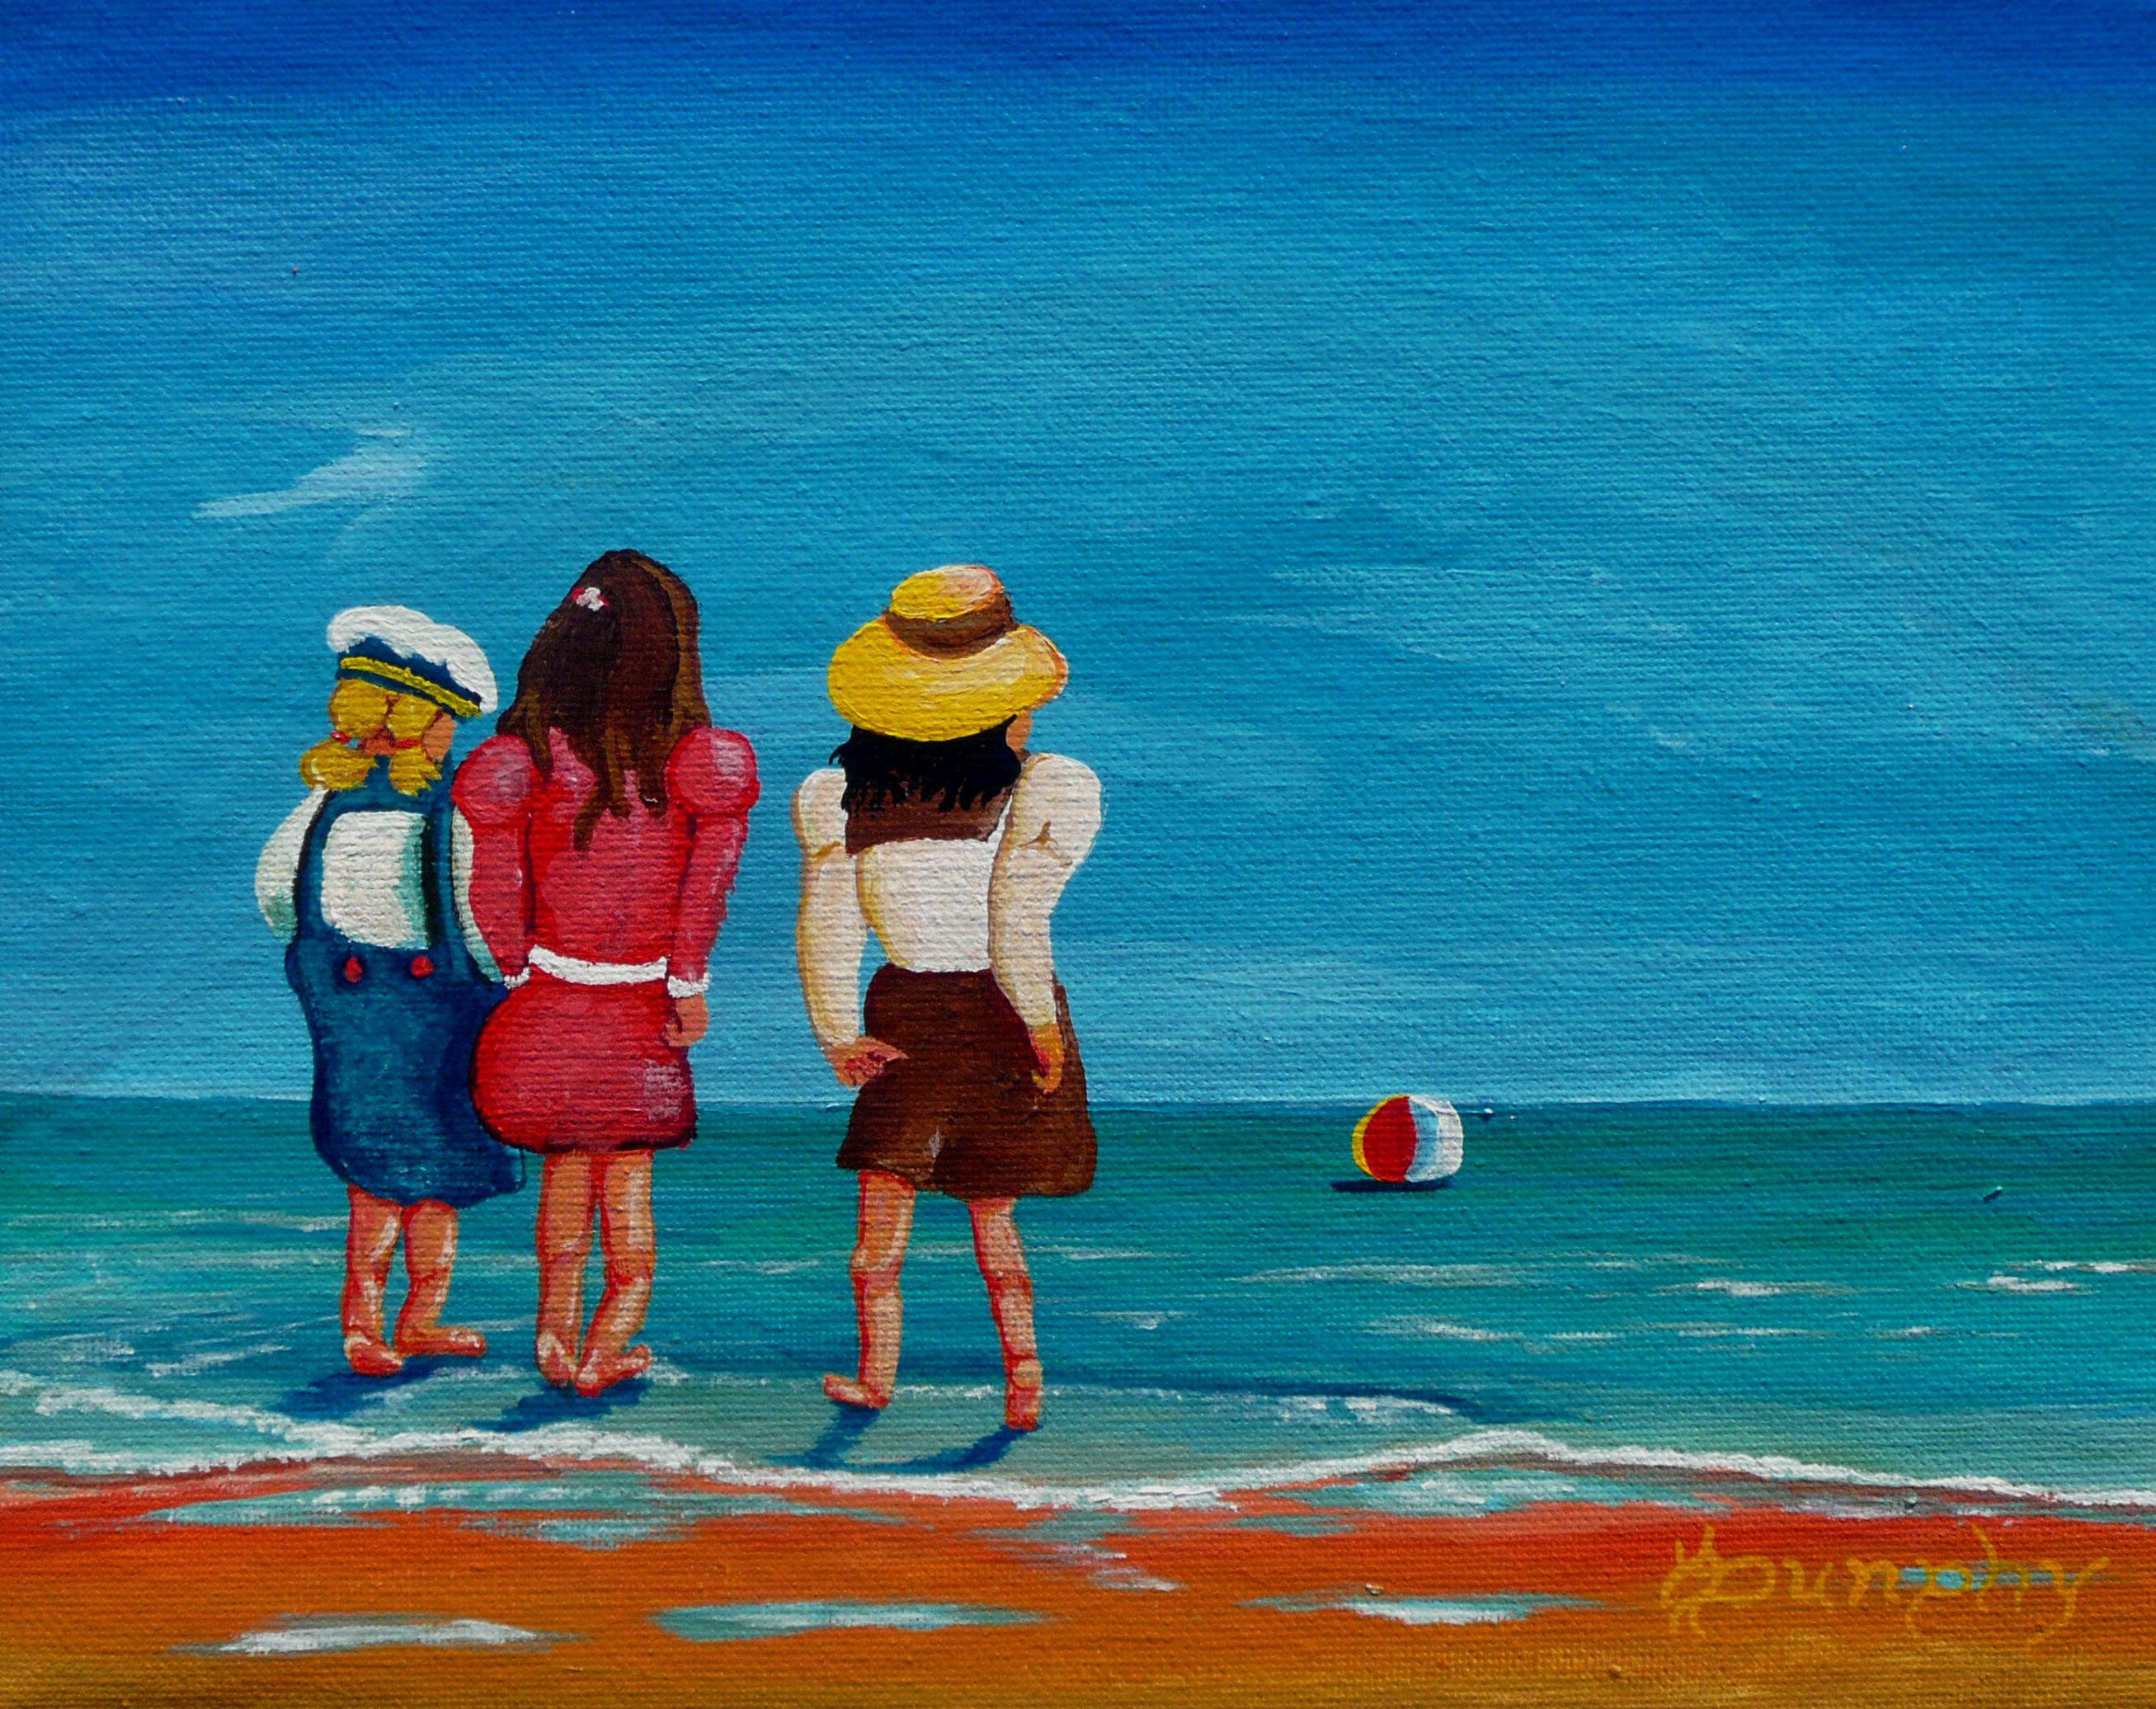 These three little girls had been enjoying their day at the beach while playing with their ball when the ball was hit into the sea and slowly floats out of their reach as they watch it slowly receding from their view.     This painting has been